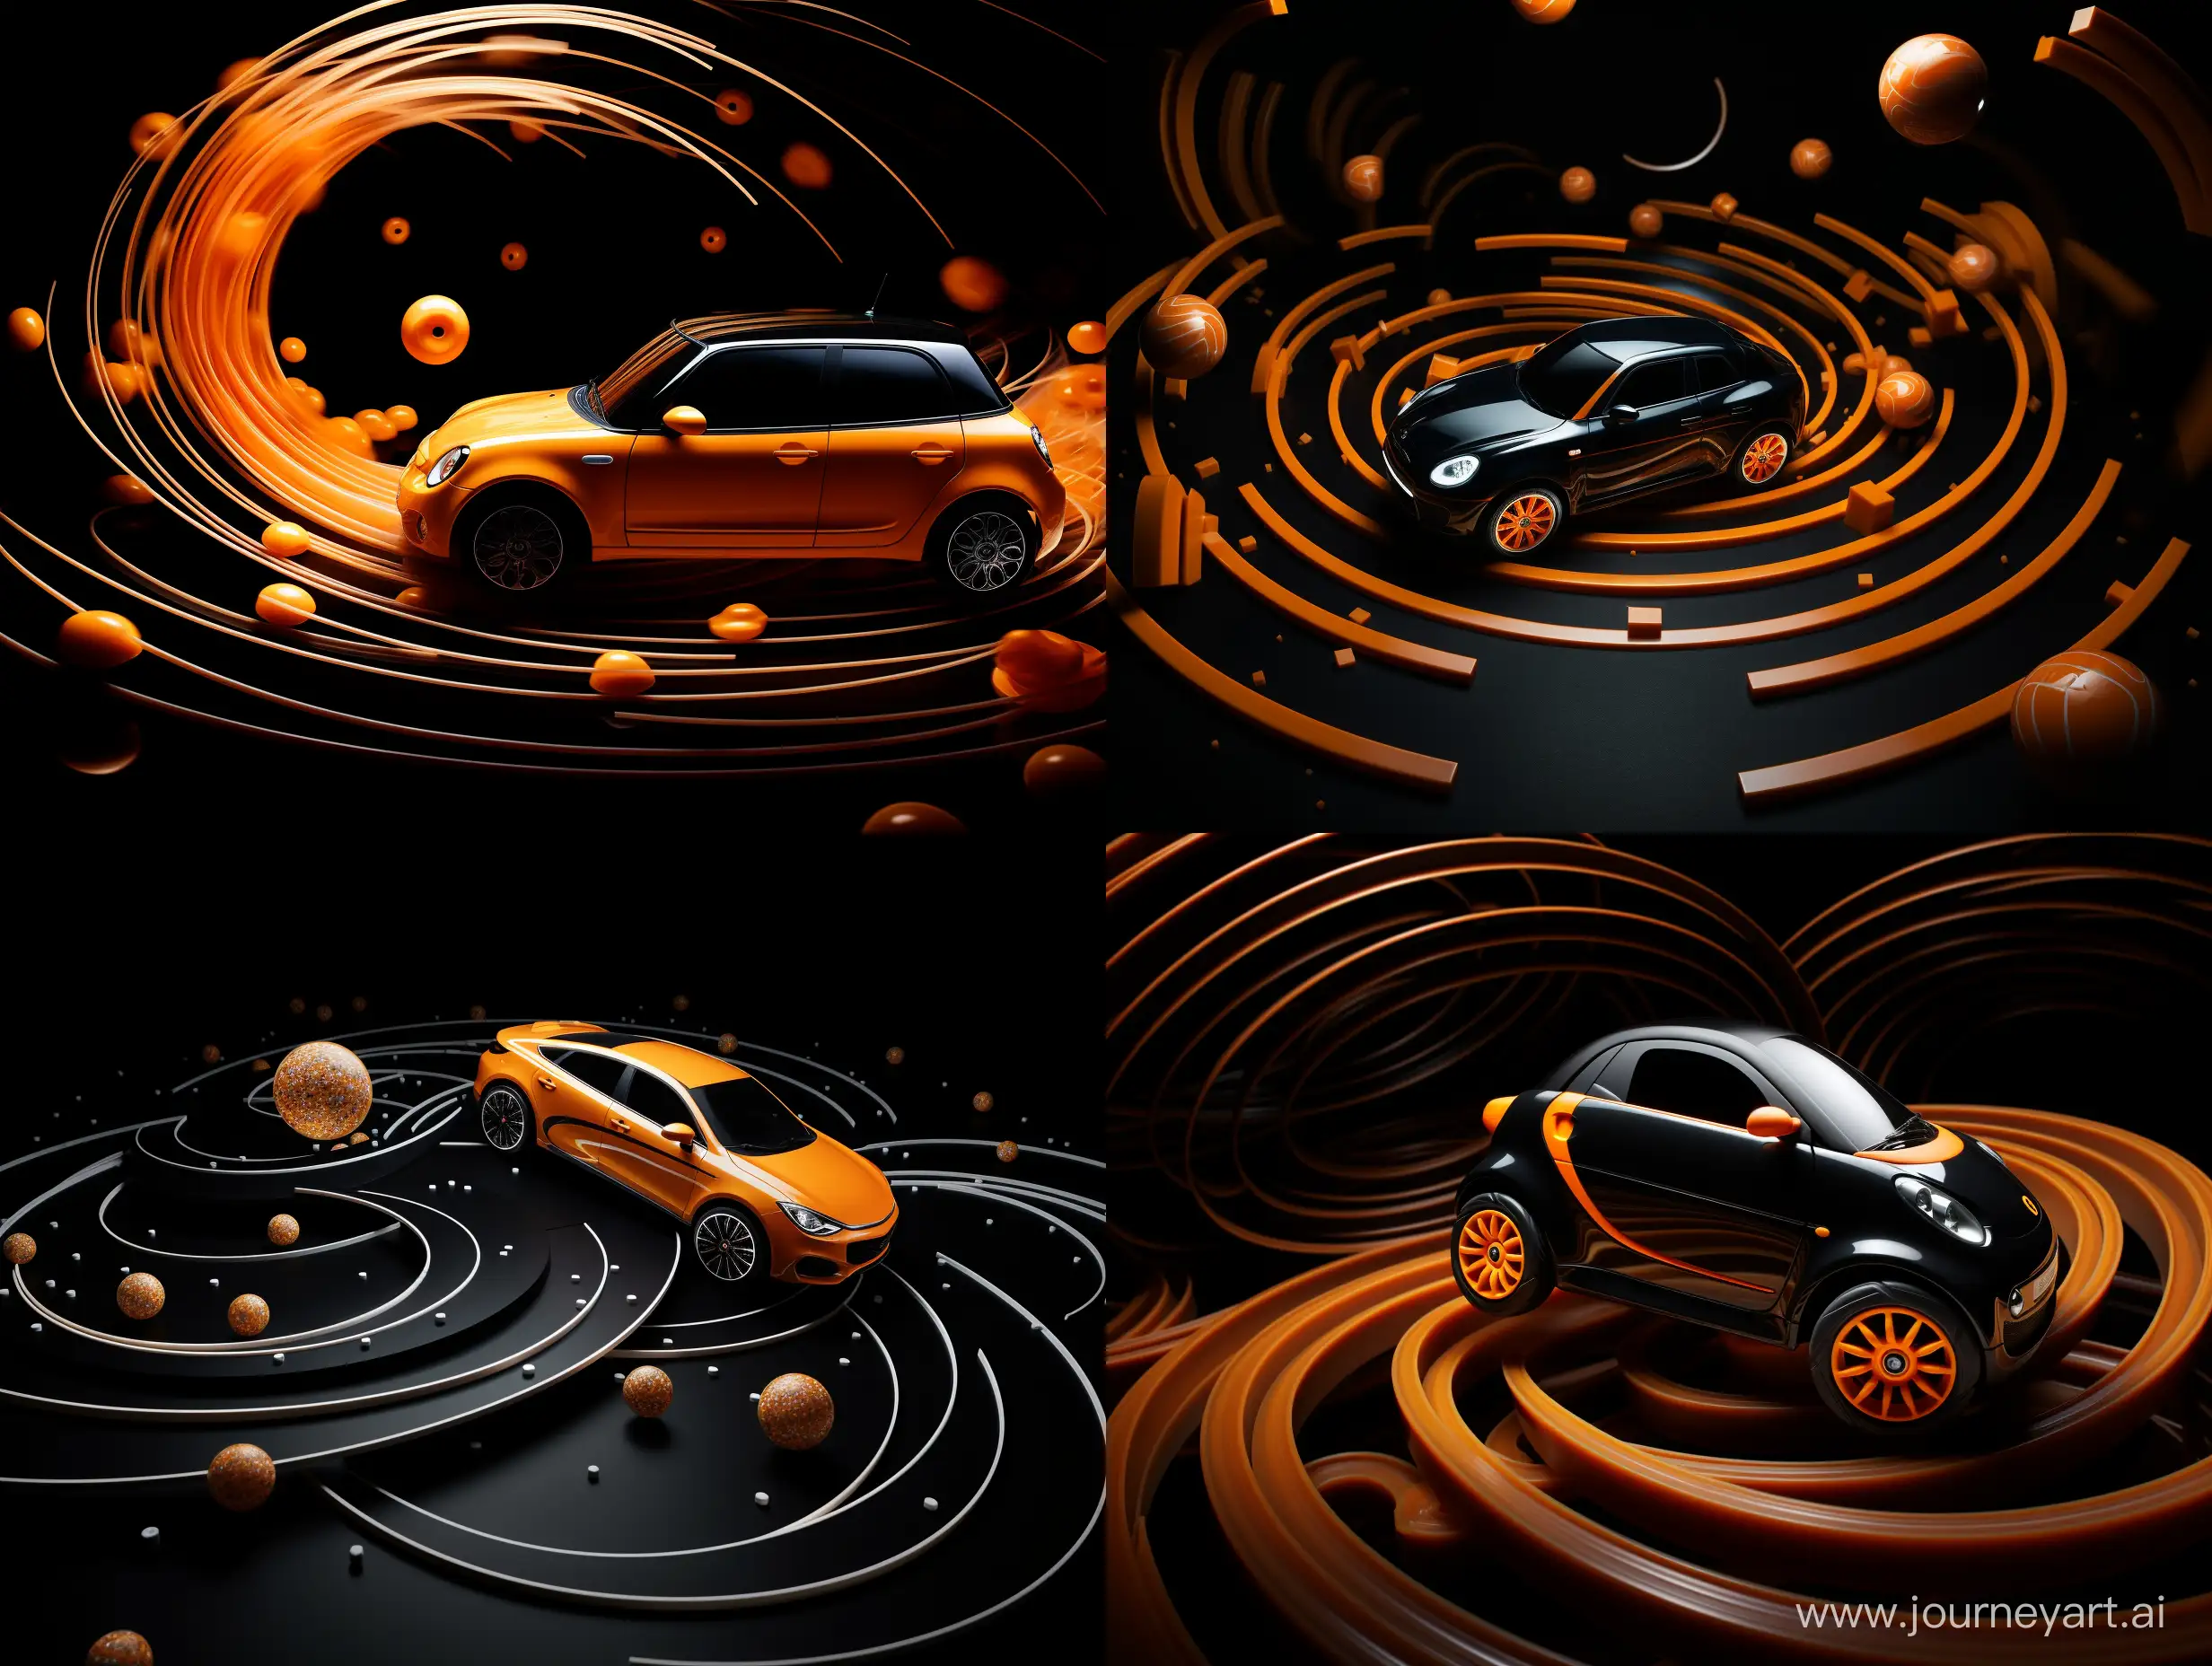 Dynamic-Orange-Toy-Car-Racing-in-Whirlwind-on-Black-Background